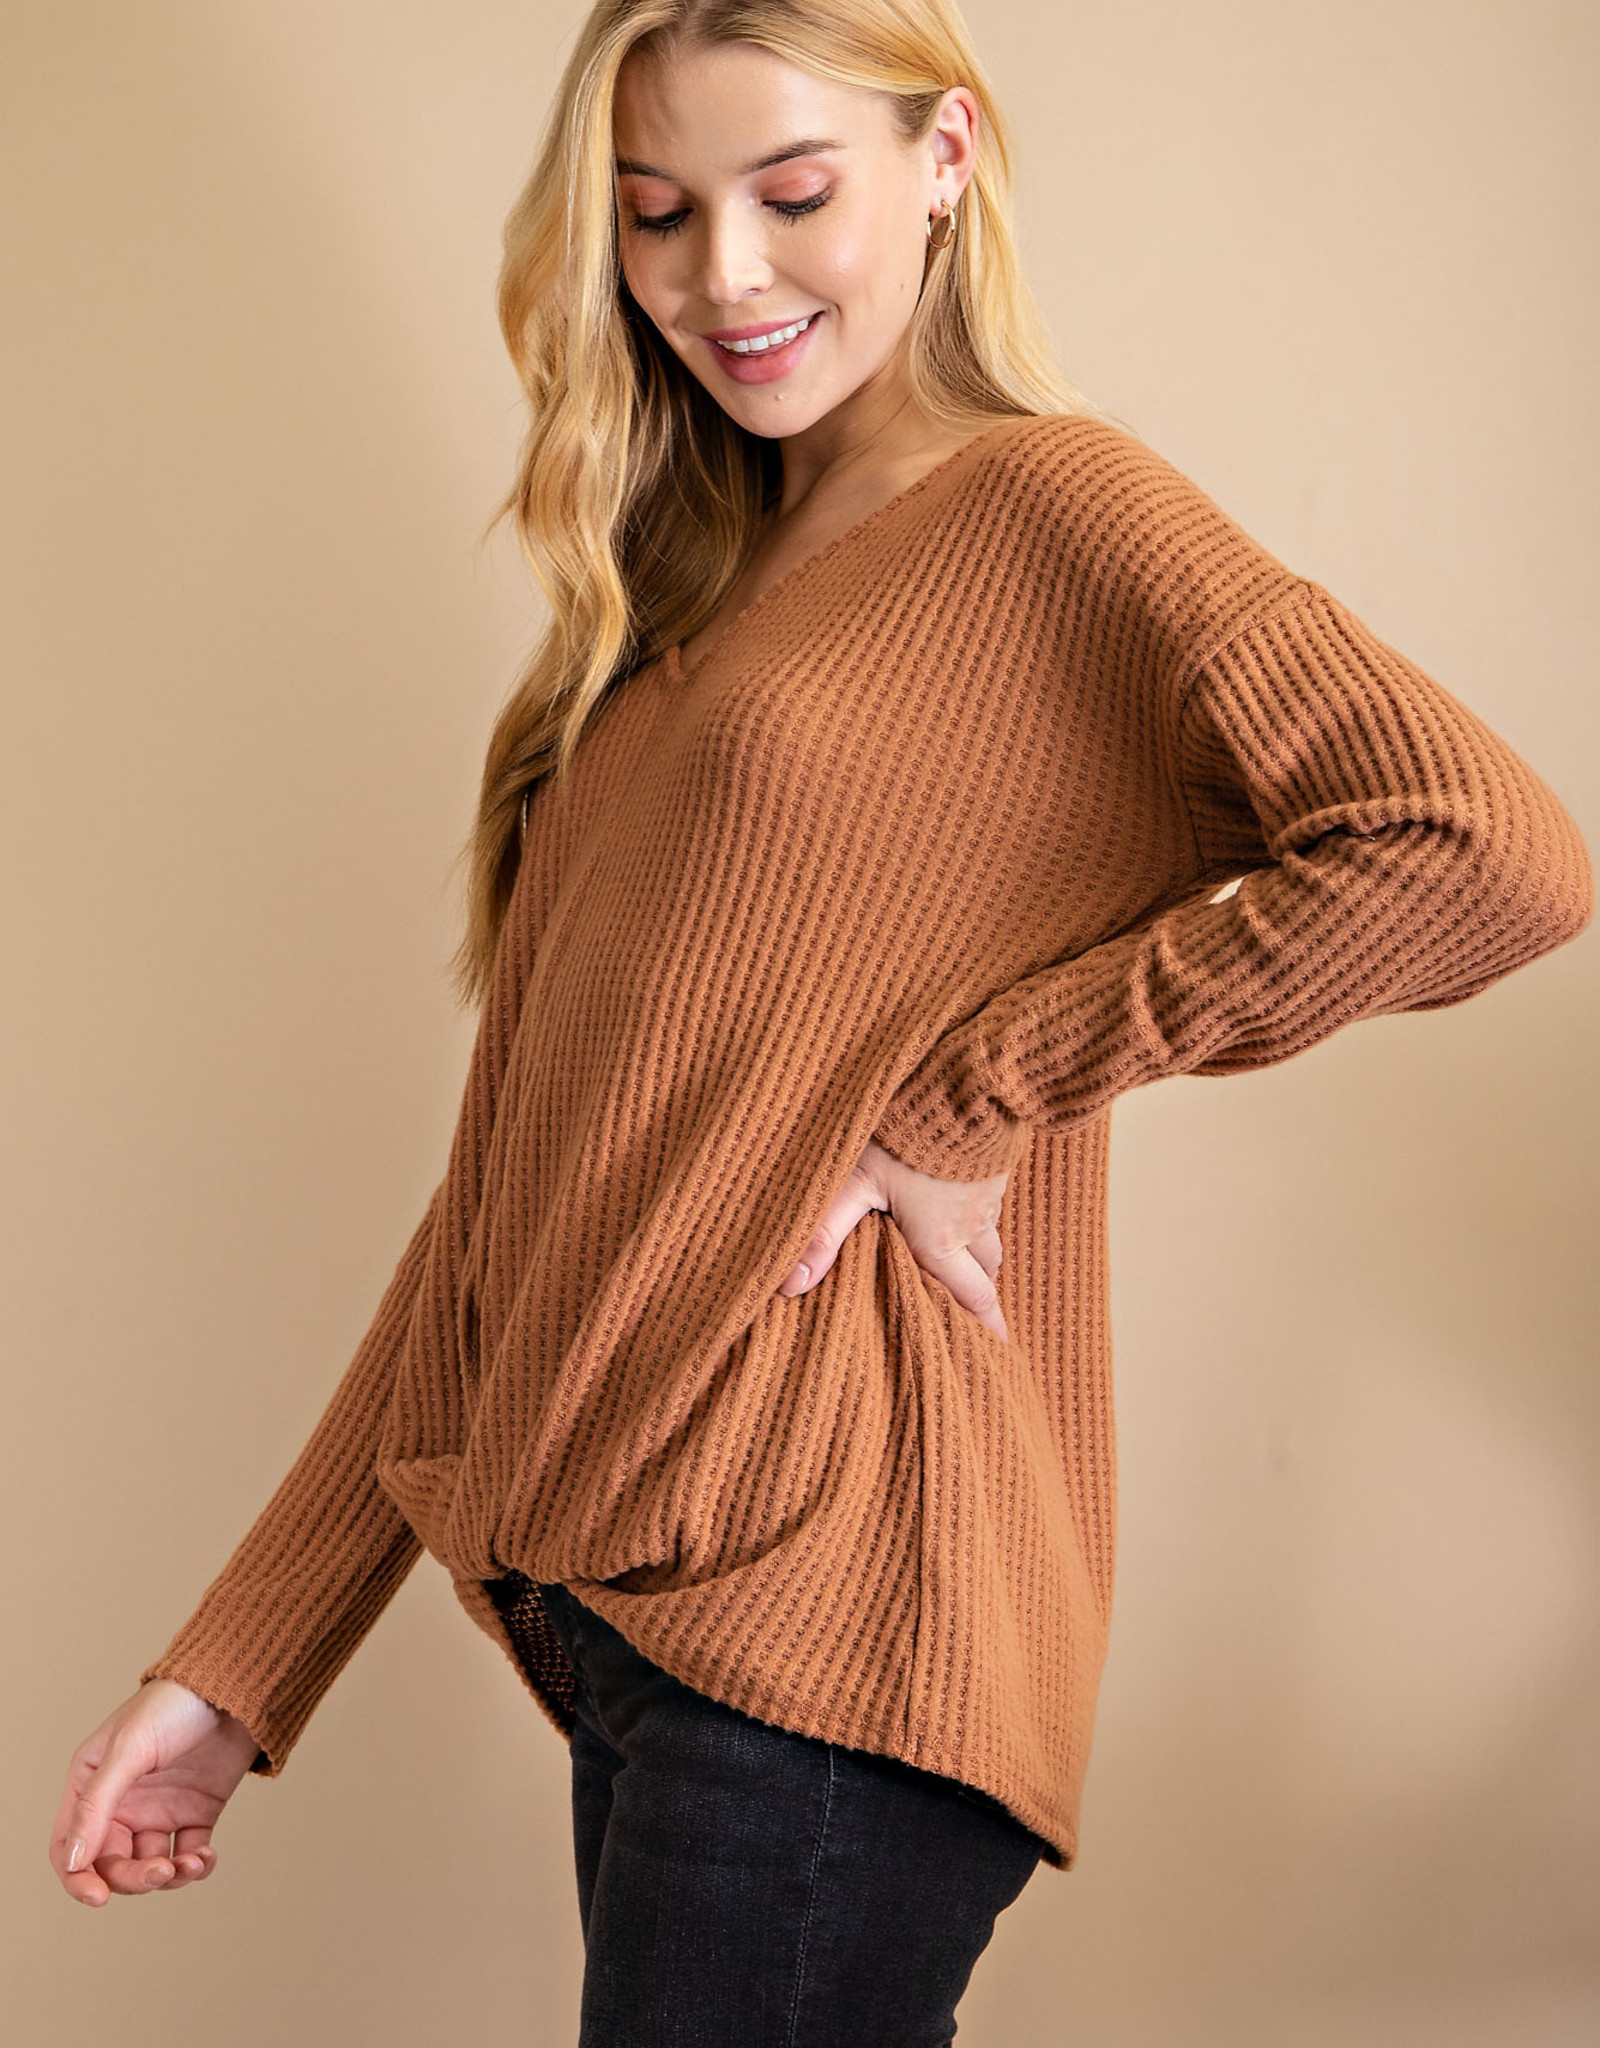 LLove Thermal Waffle Knit Twist Knot Long Sleeve Top - LV7894